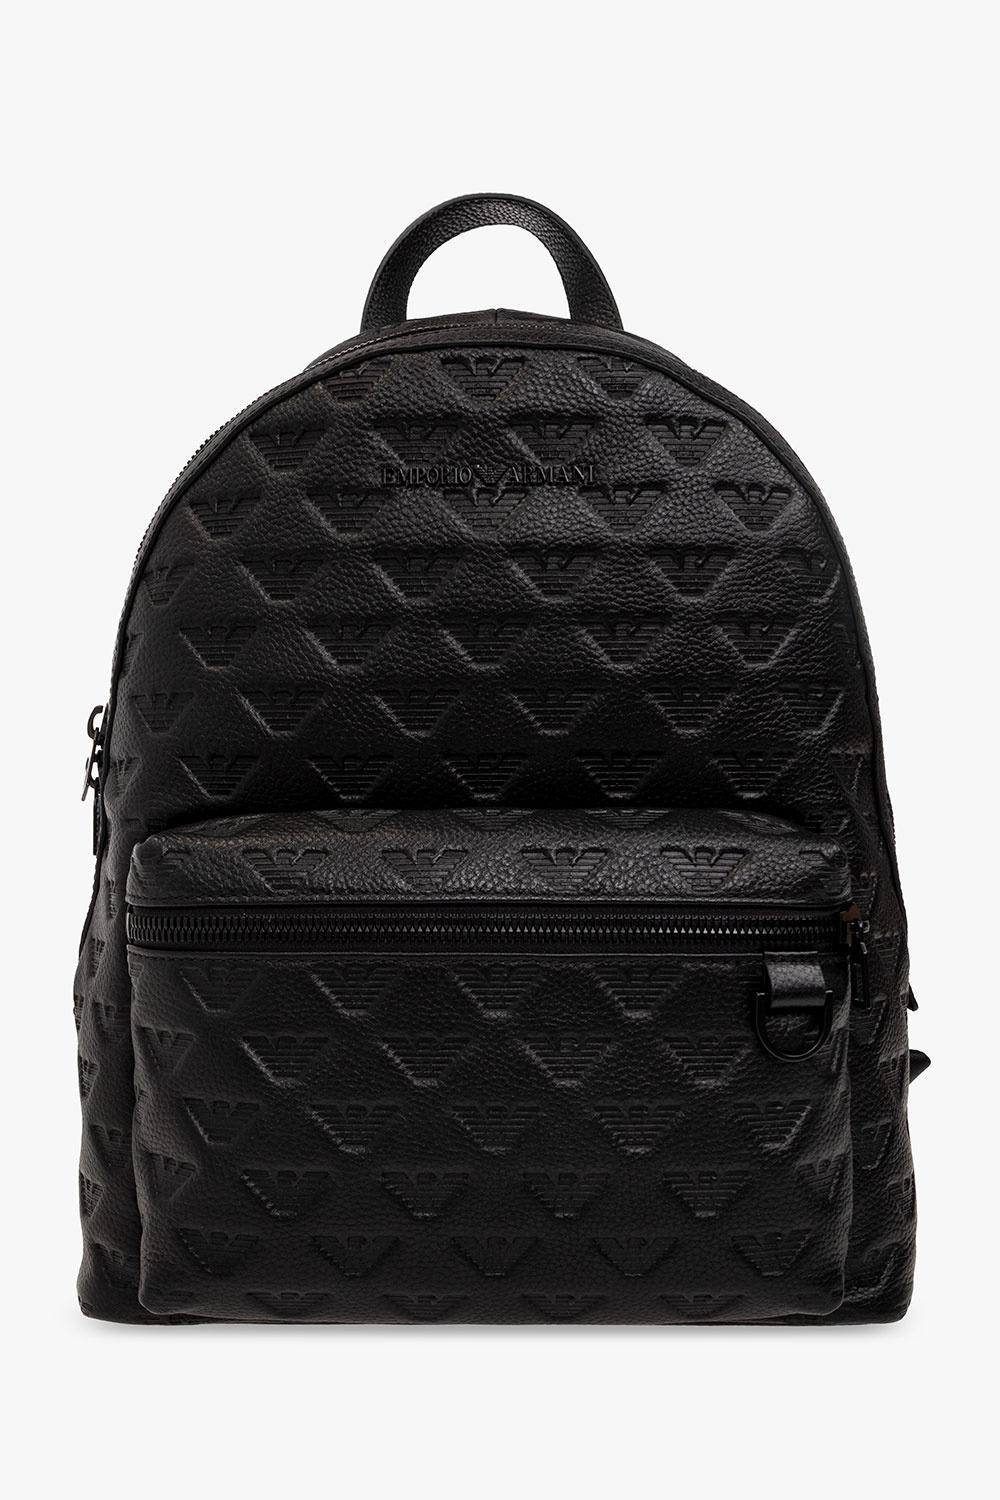 Emporio Armani Embossed Leather Backpack In Black